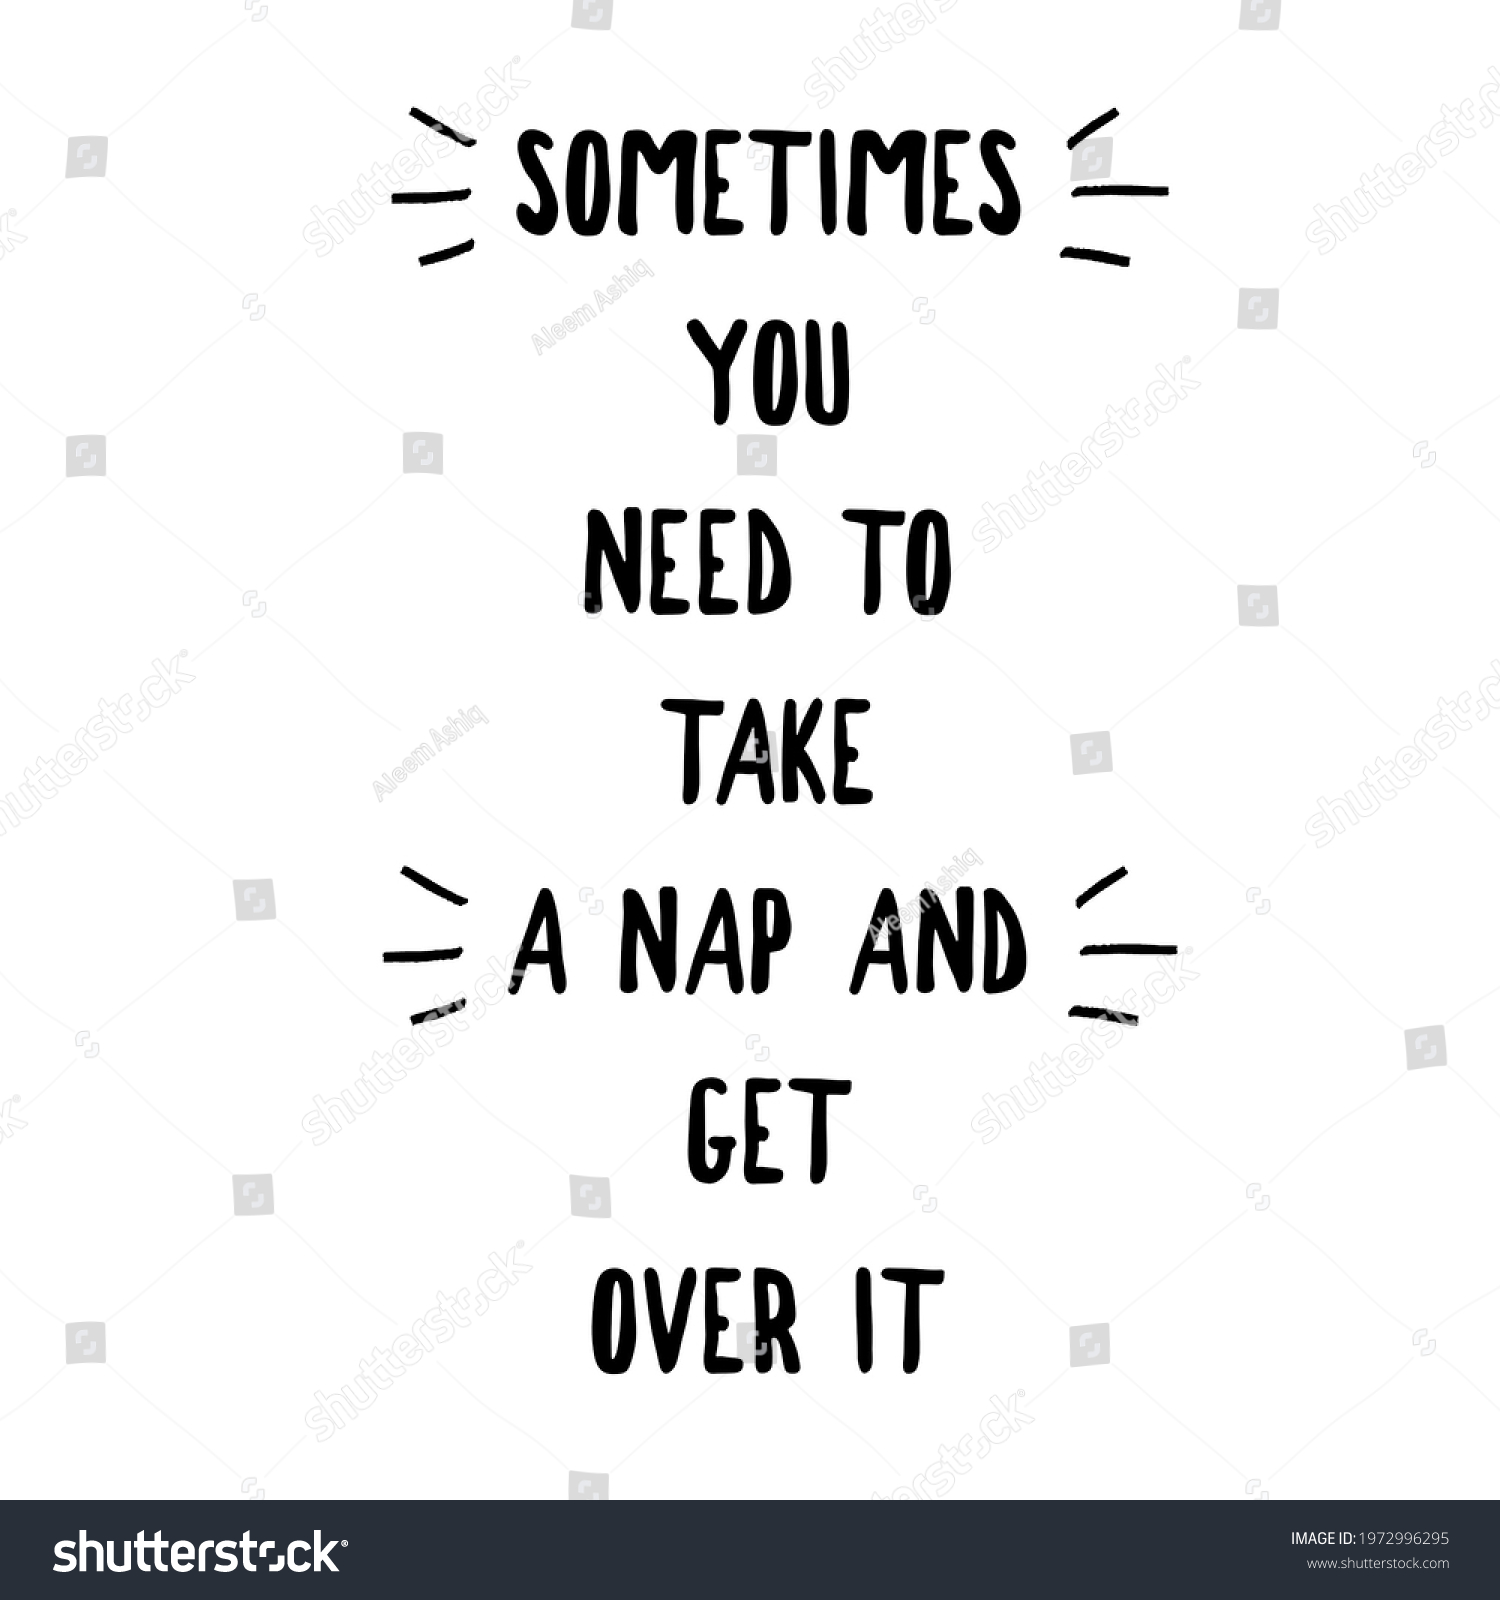 Sometimes you just need to take a nap and get over it.